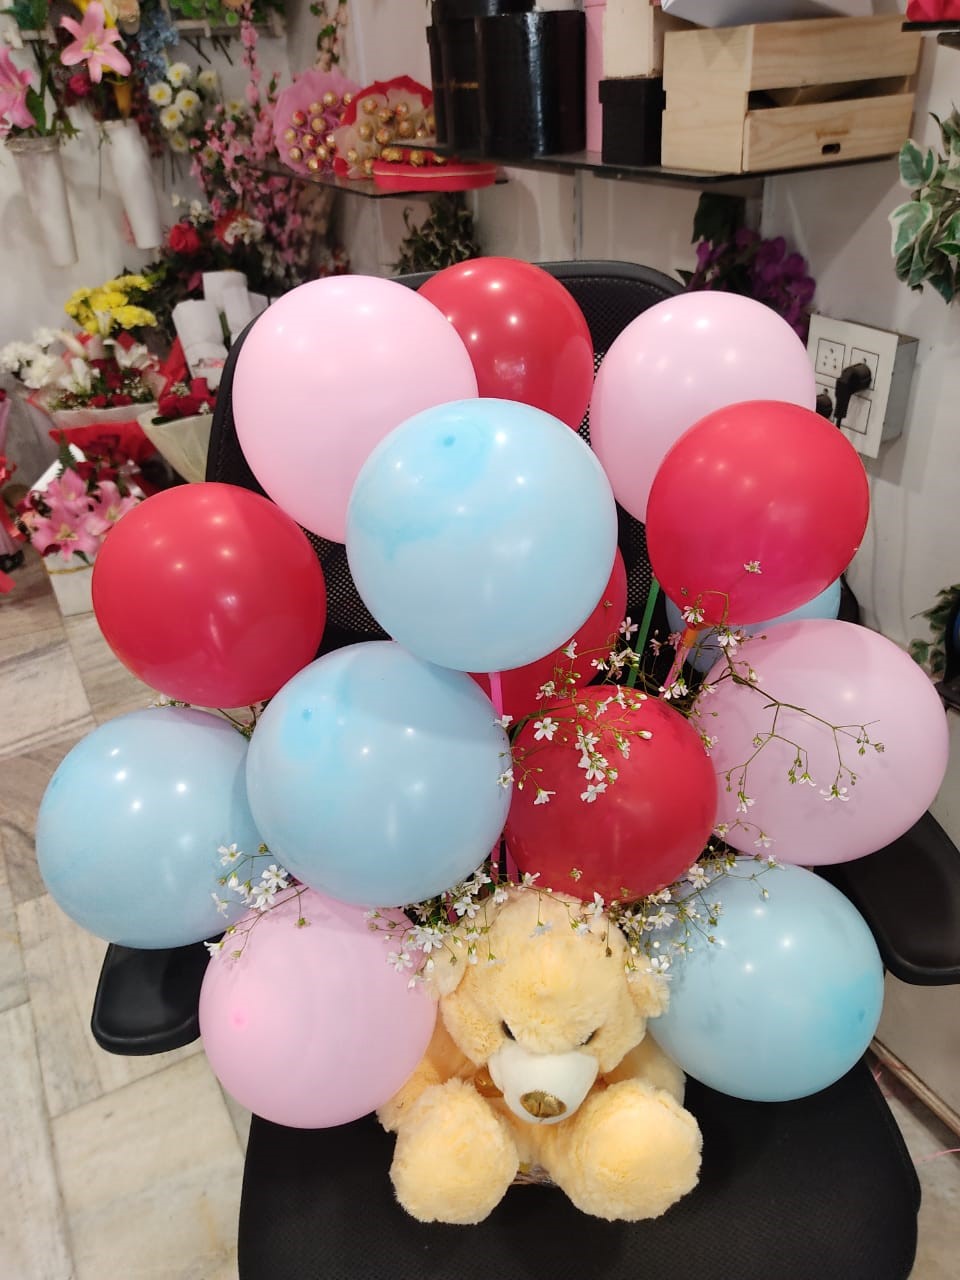 Teddy and Balloons: Send Birthday gift 12 inches Teddy and balloons for same day delivered C-TBB